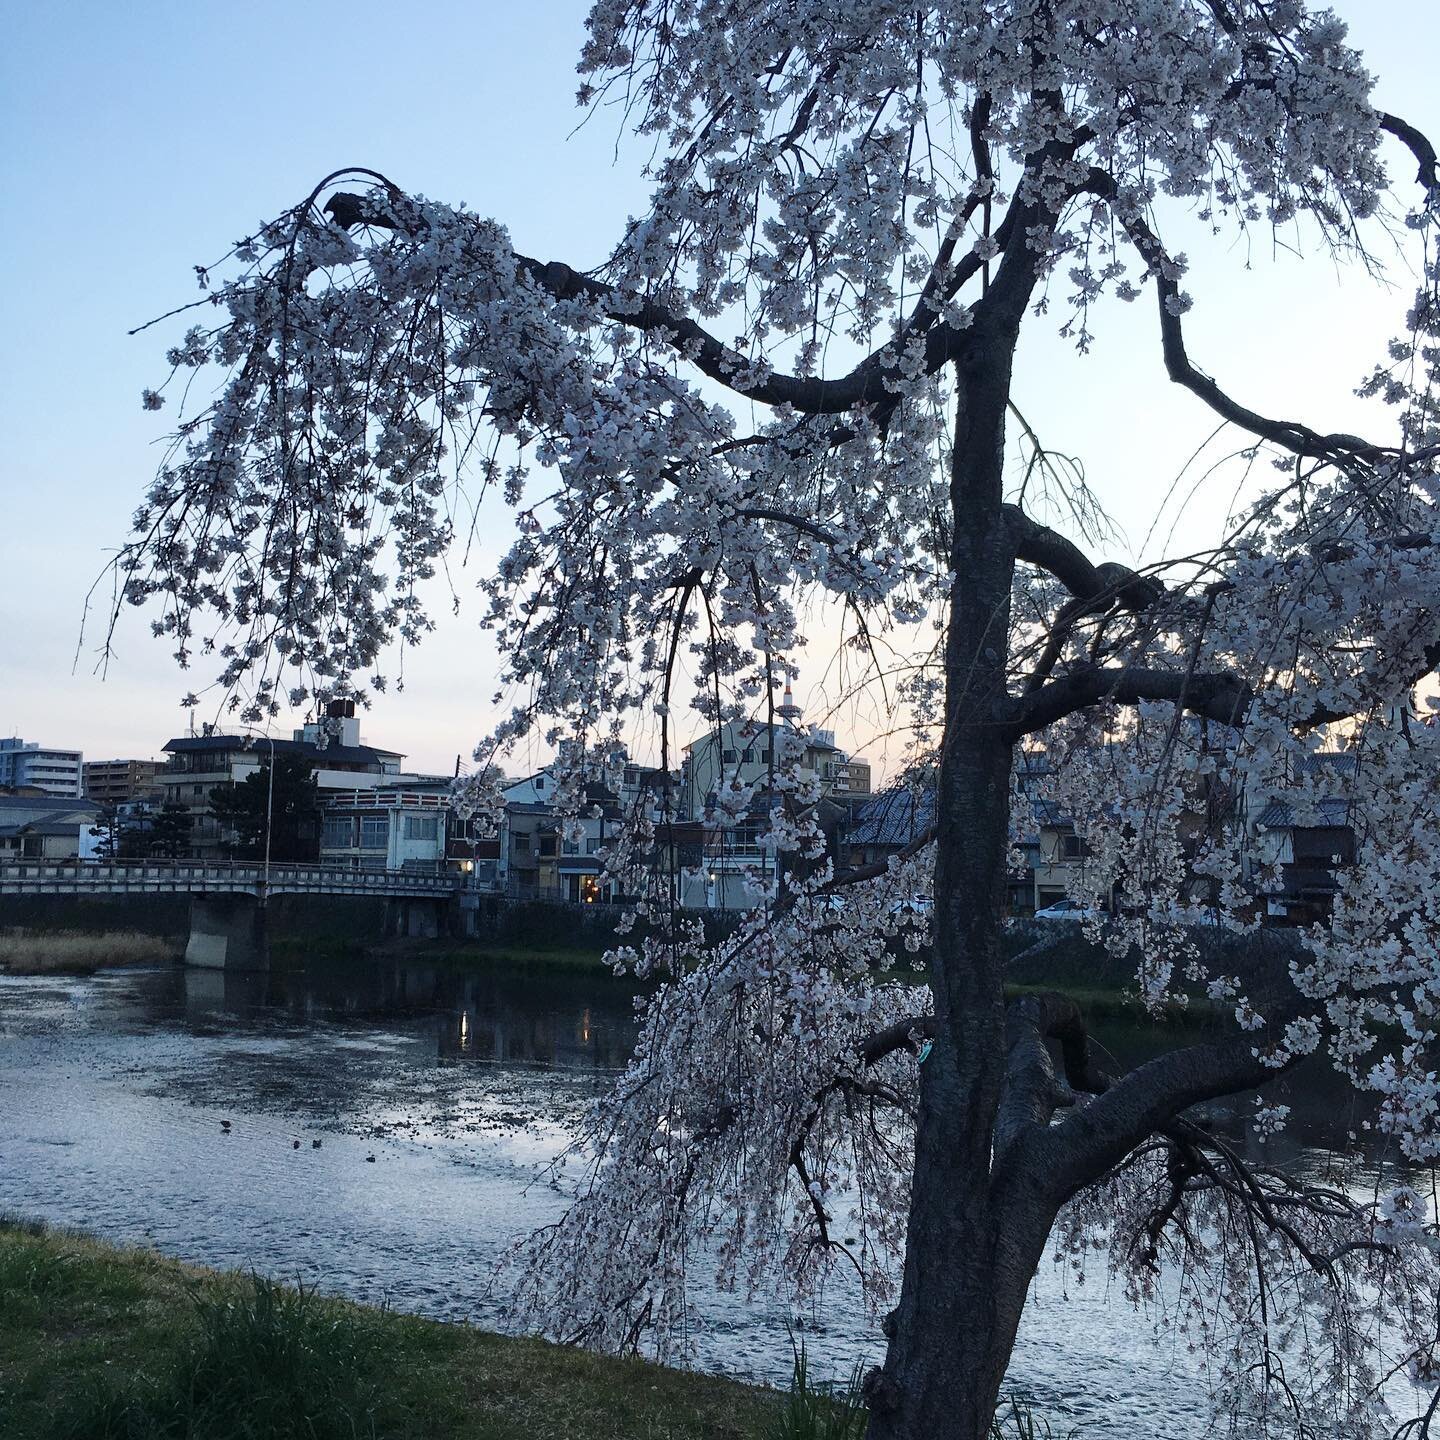 Magic moment before sunset in #kyoto